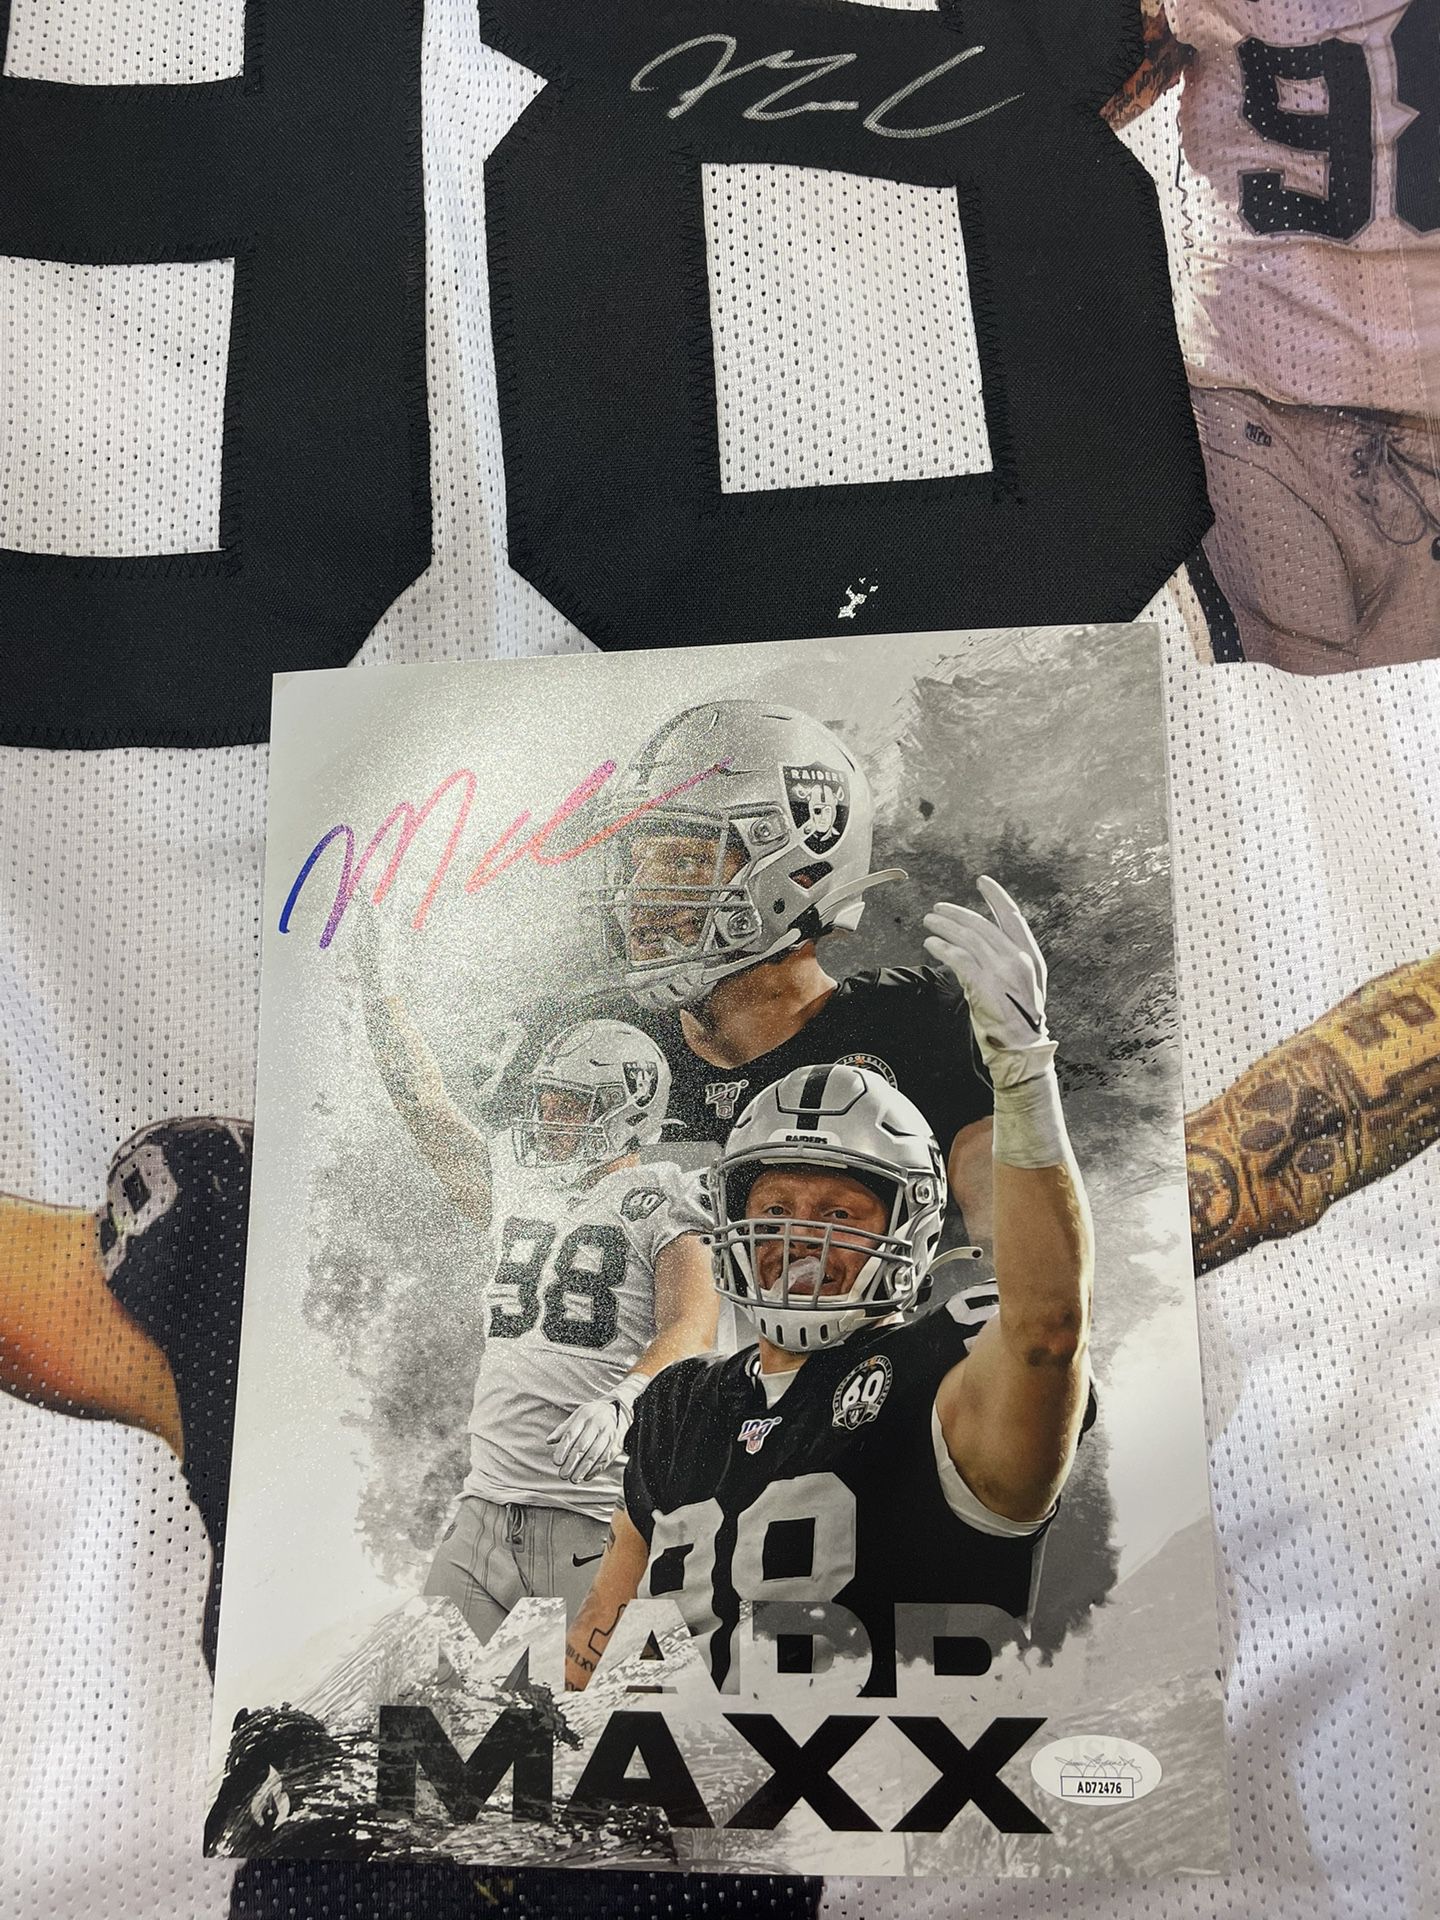 Maxx Crosby Signed Autographed Las Vegas Raiders Custom Jersey (BAS CERT) +  8x10 for Sale in Byron, CA - OfferUp